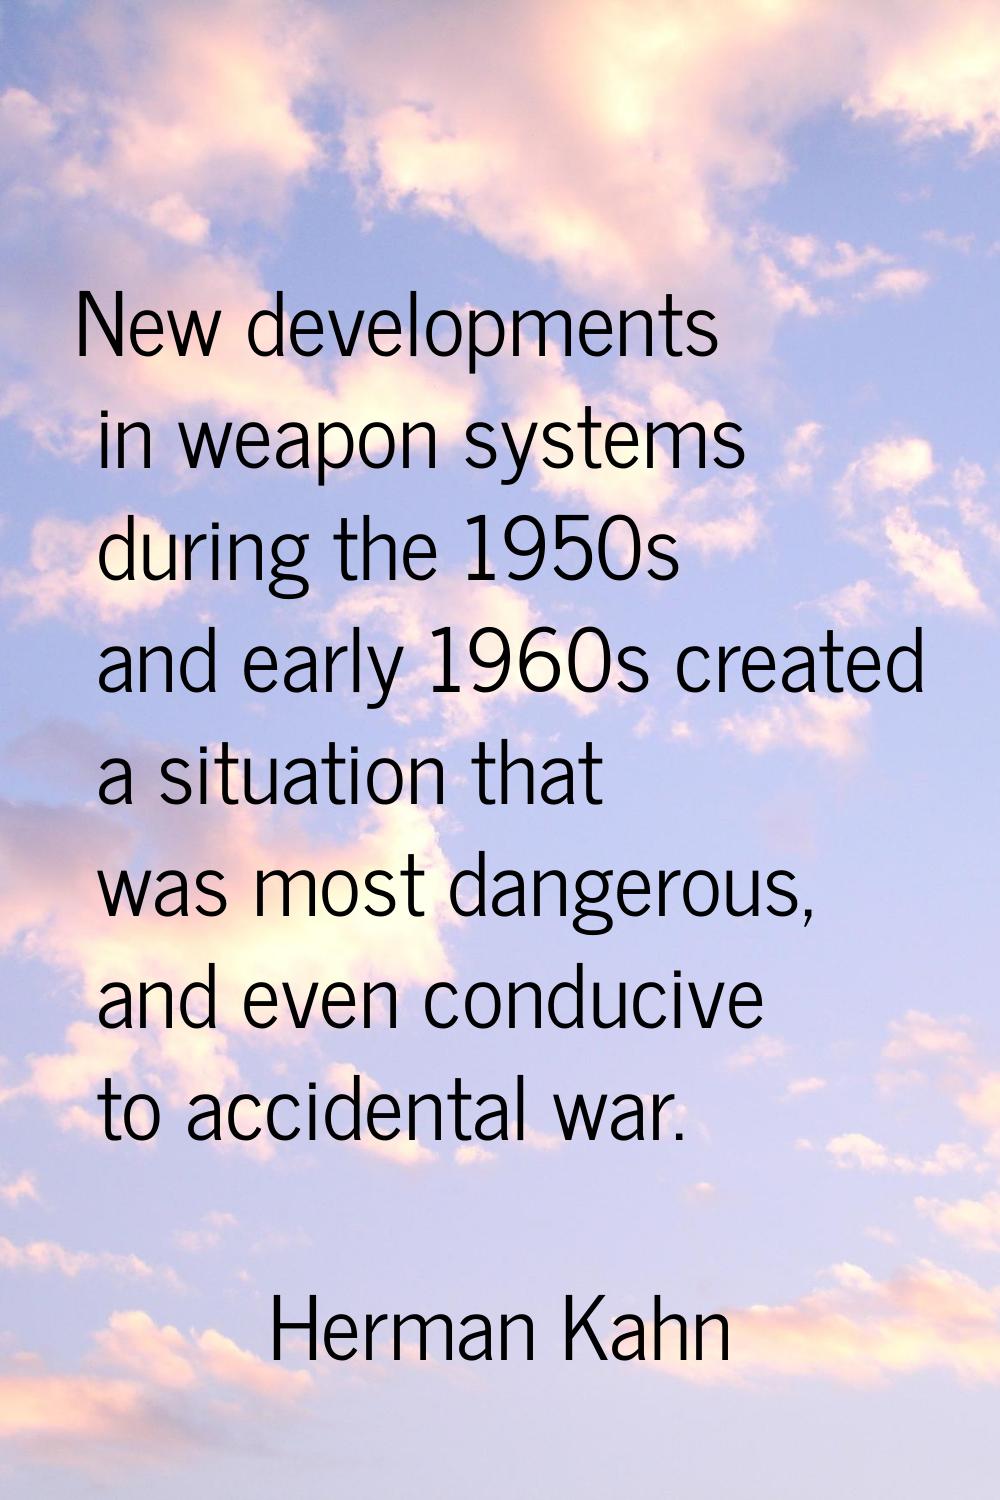 New developments in weapon systems during the 1950s and early 1960s created a situation that was mo